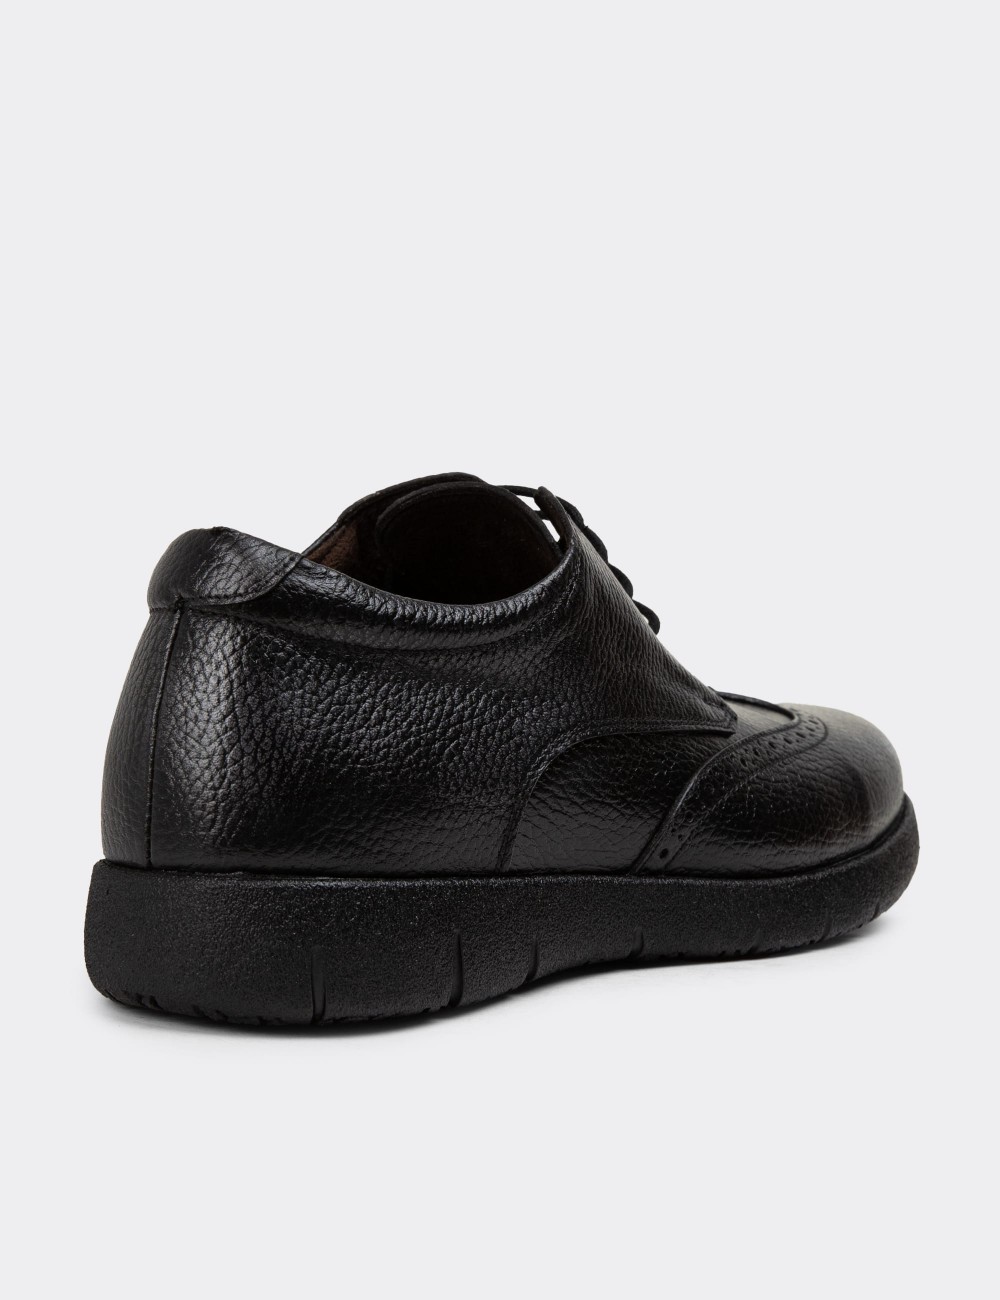 Anthracite Leather Lace-up Shoes - 01969MANTC01